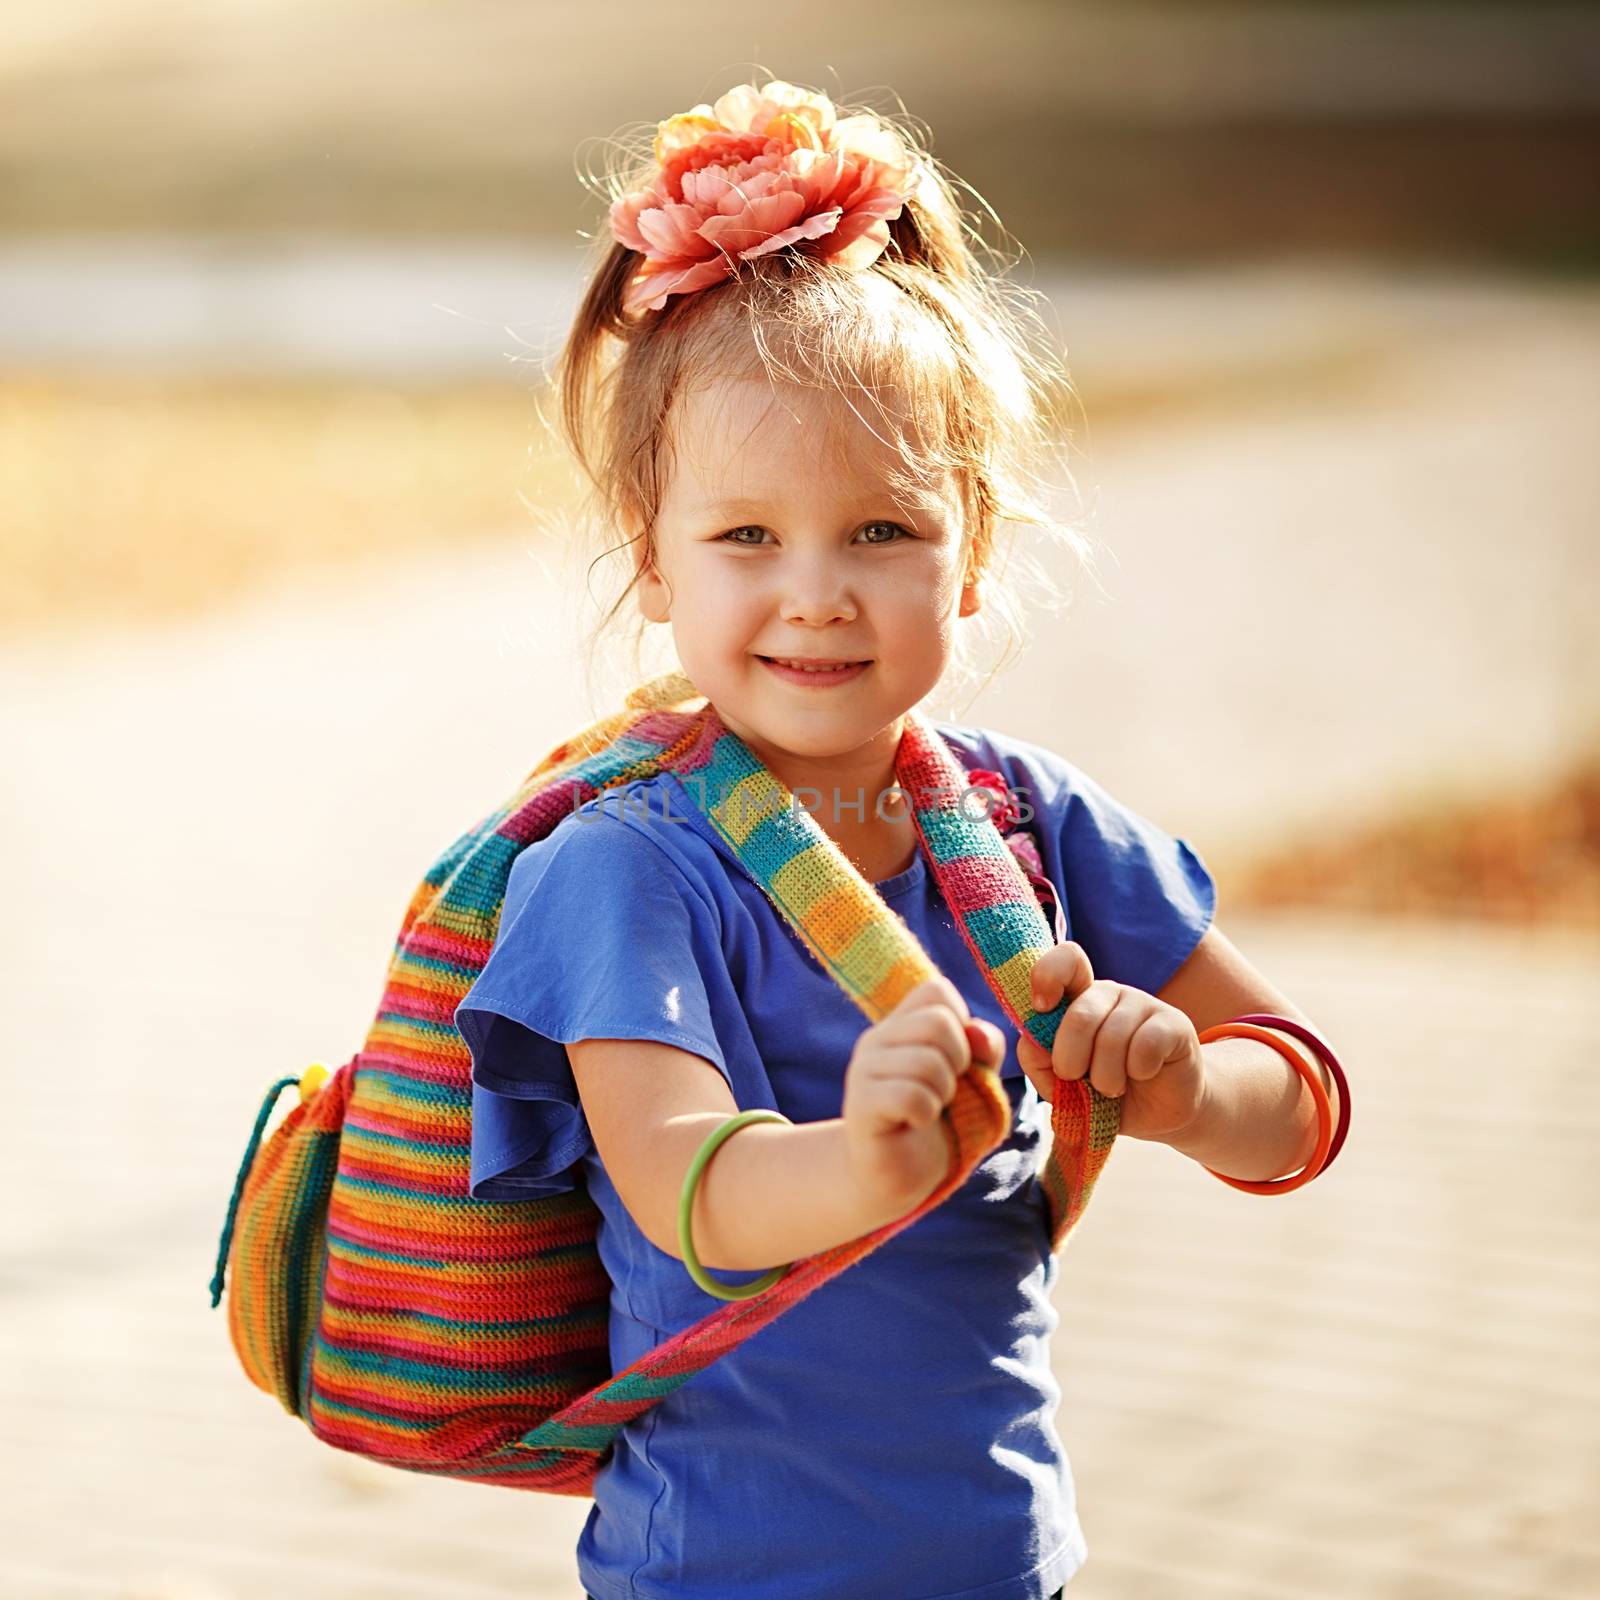 Portrait of an adorable preschool age girl with colorful knitted backpack. Preparation for school